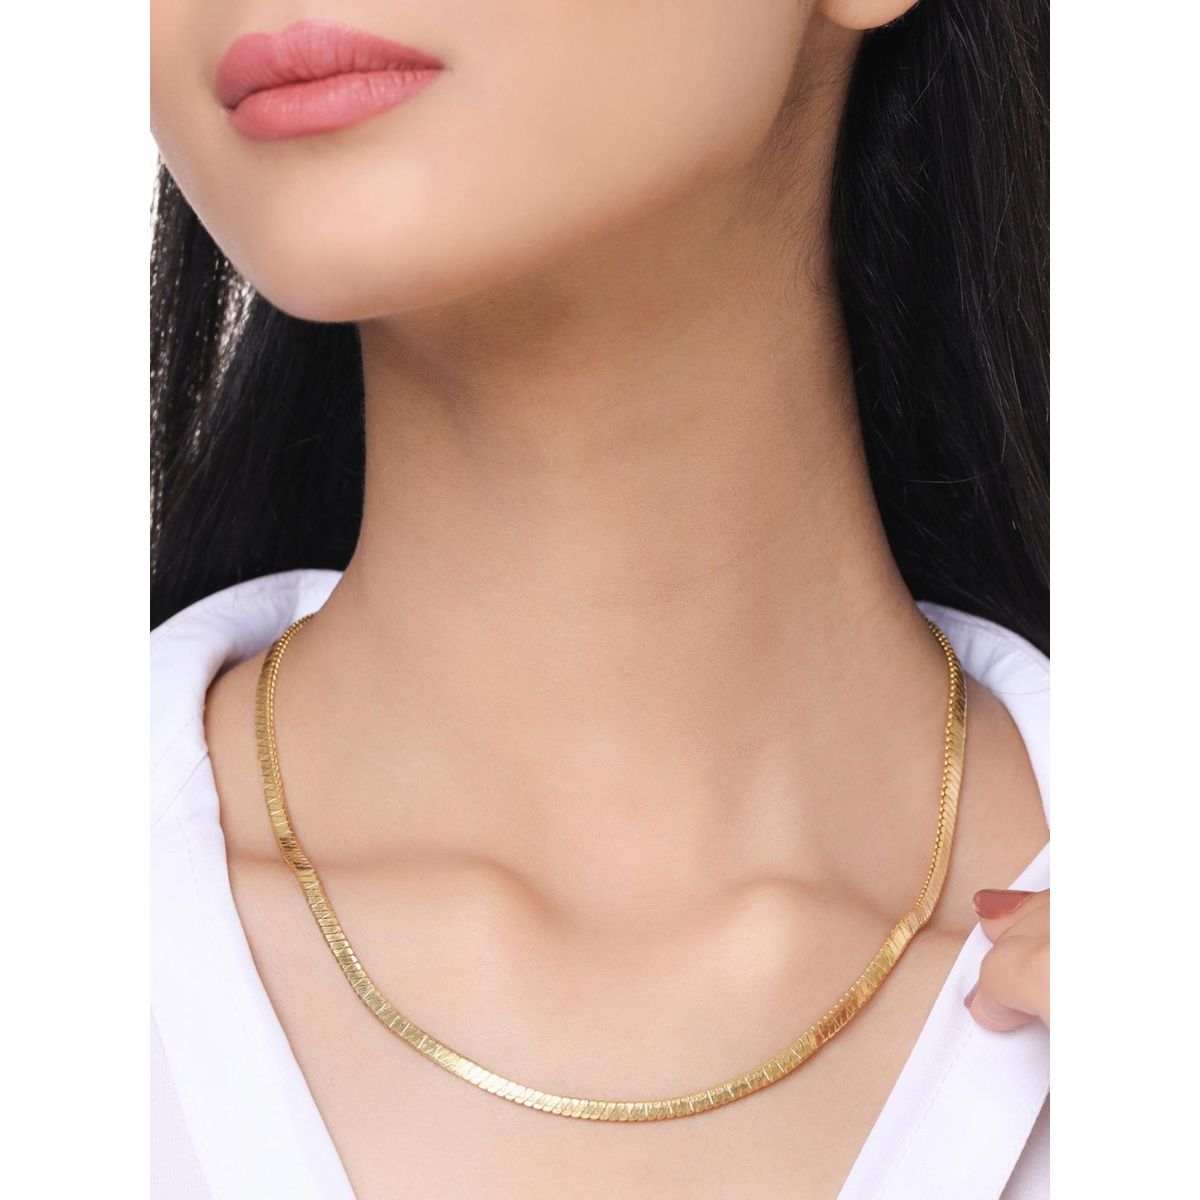 SNAKE CHAIN COLLAR NECKLACE - GOLD - FALLON JEWELRY